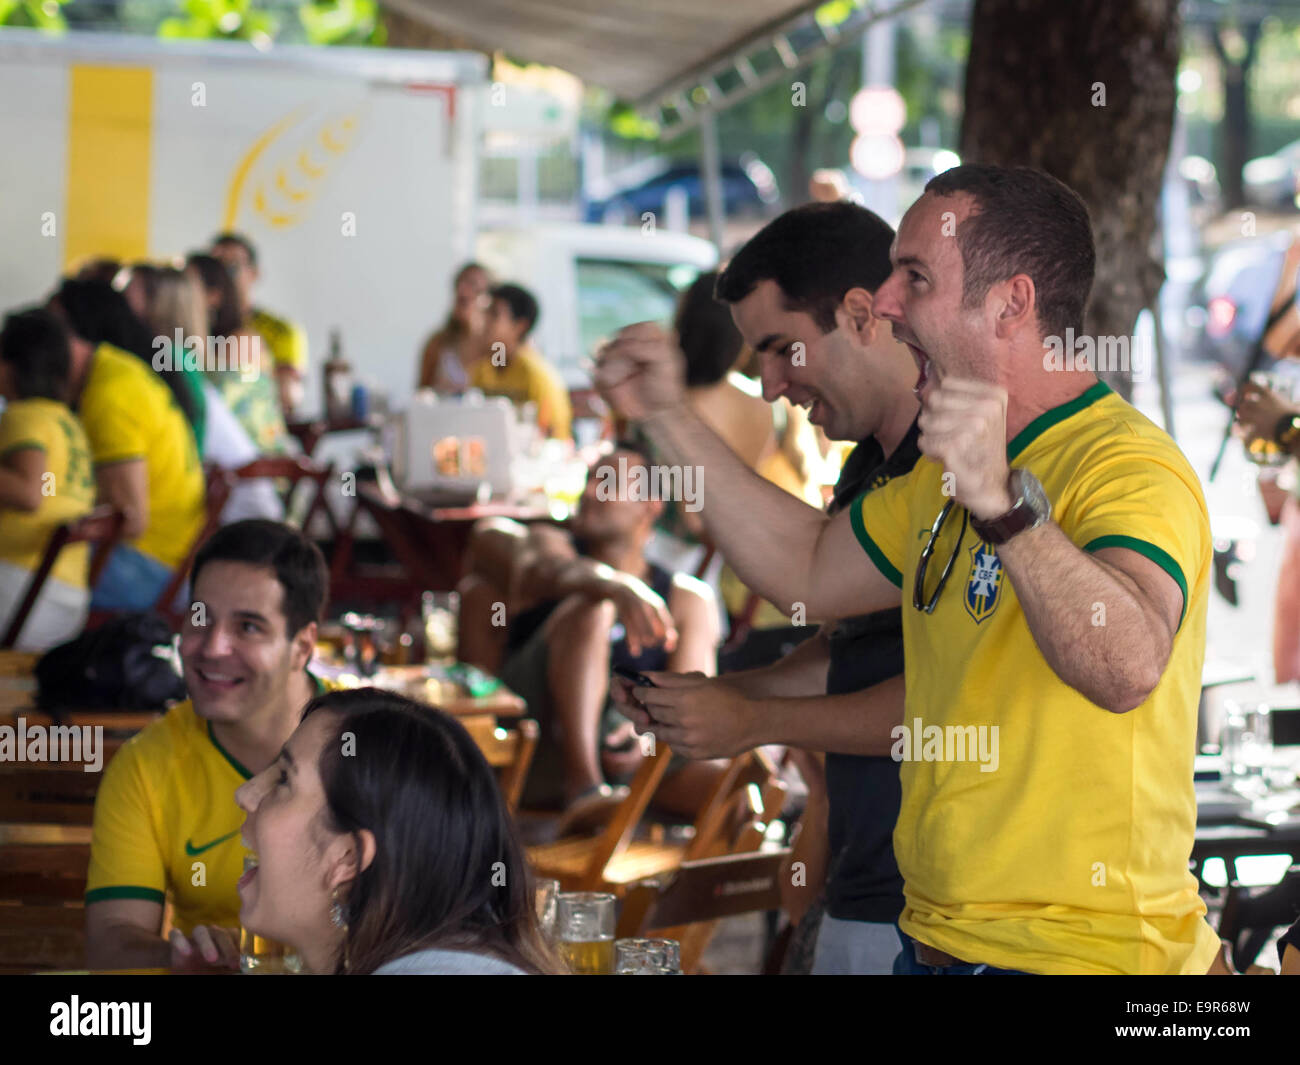 Cheerful Brazil fans celebrating victory at World Cup football match on TV at a bar in Salvador, Bahia, Brazil. Stock Photo